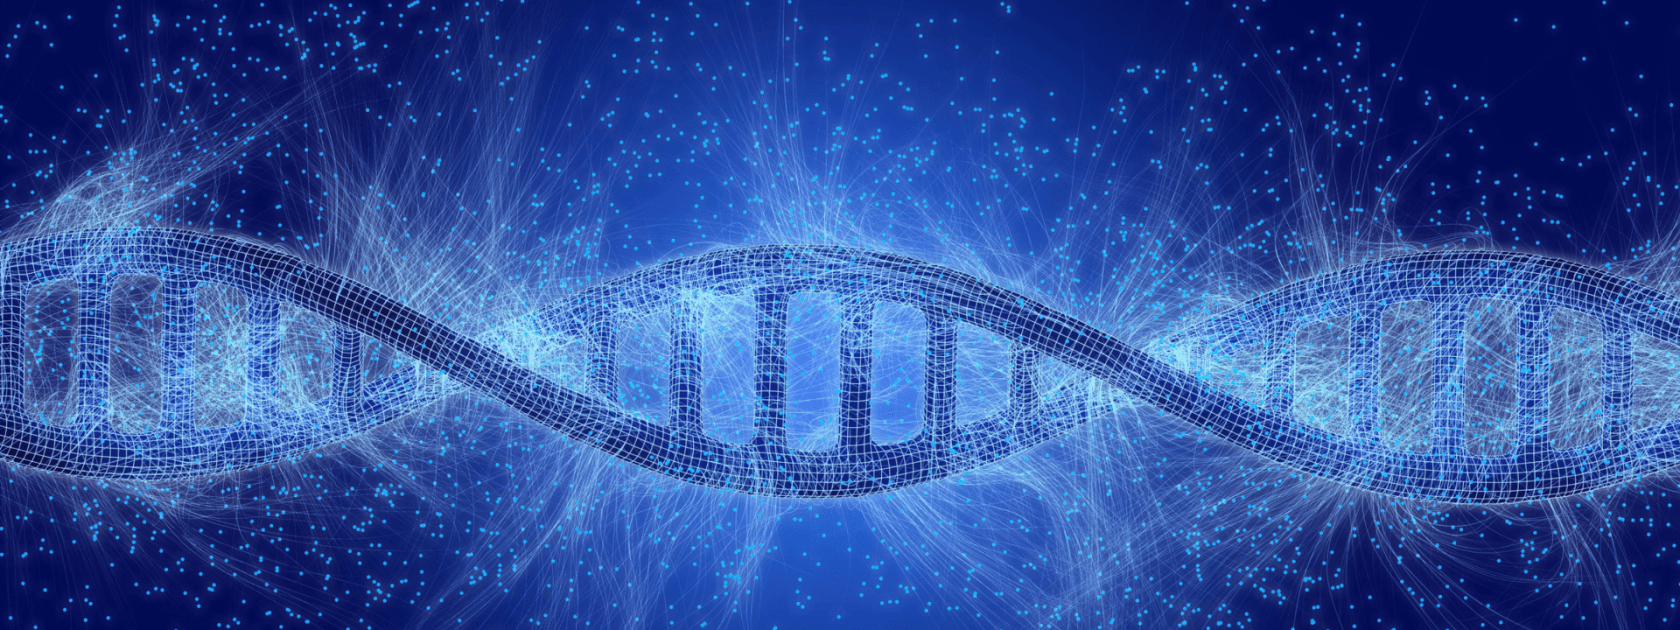 DNA helix in a blue background